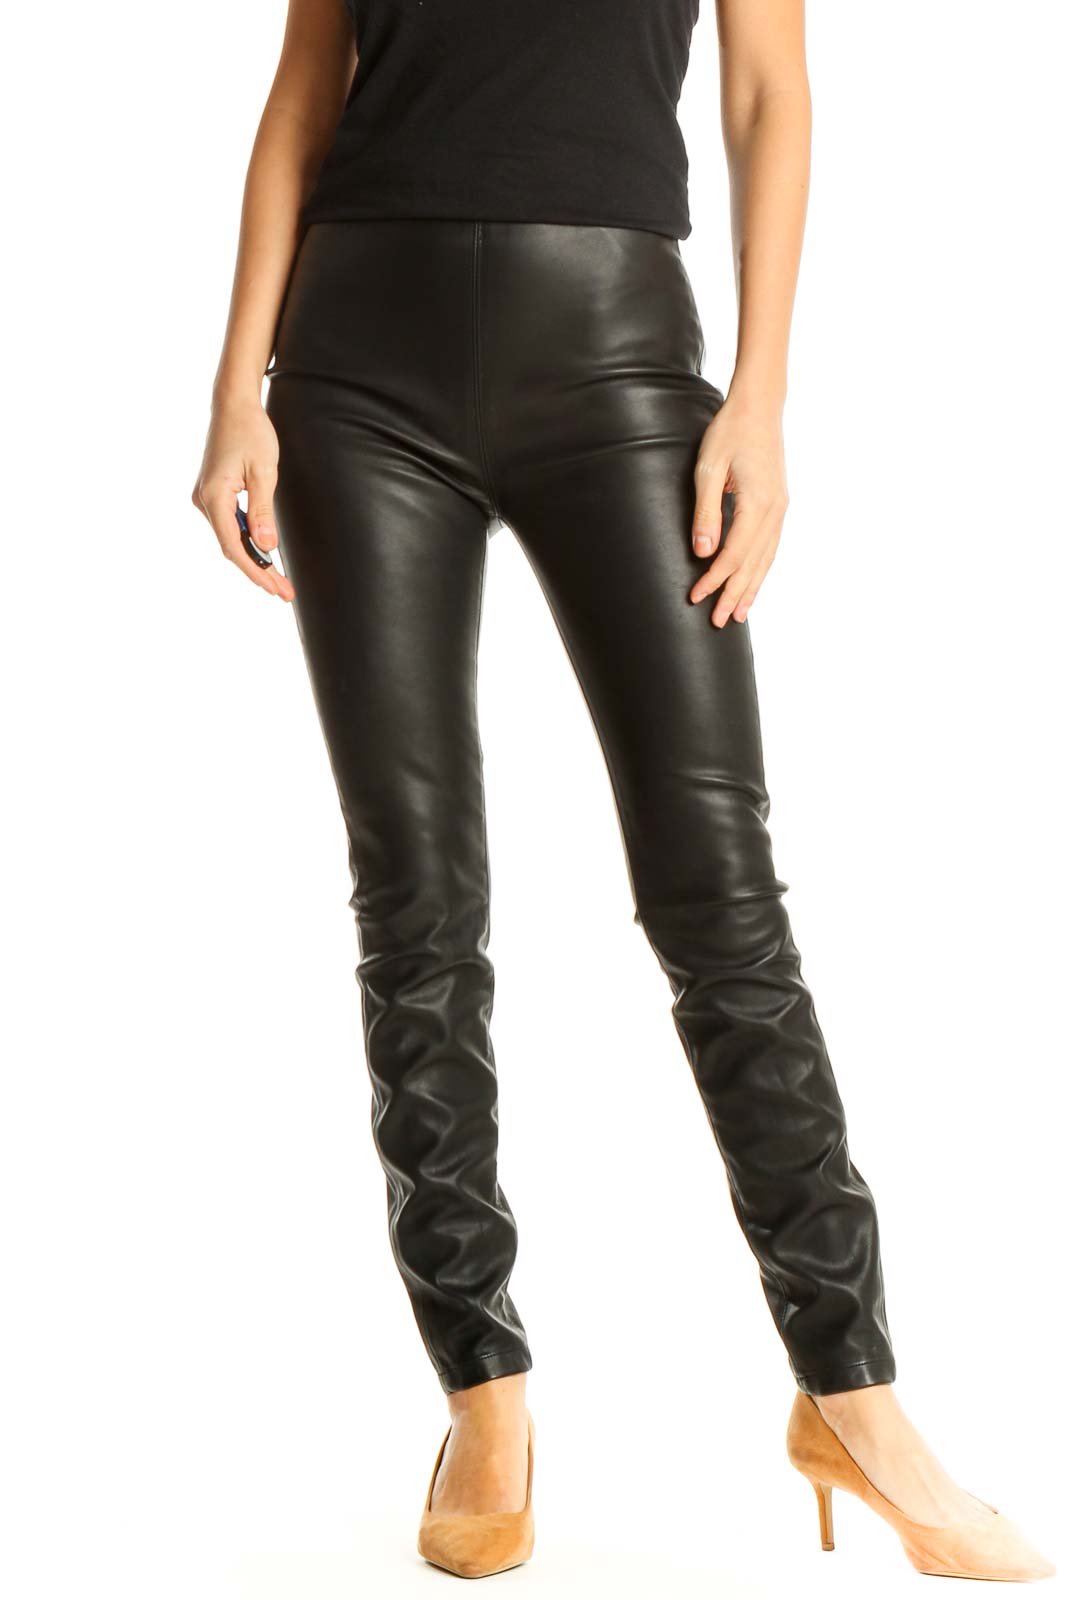 Black Chic Leather Leggings Front